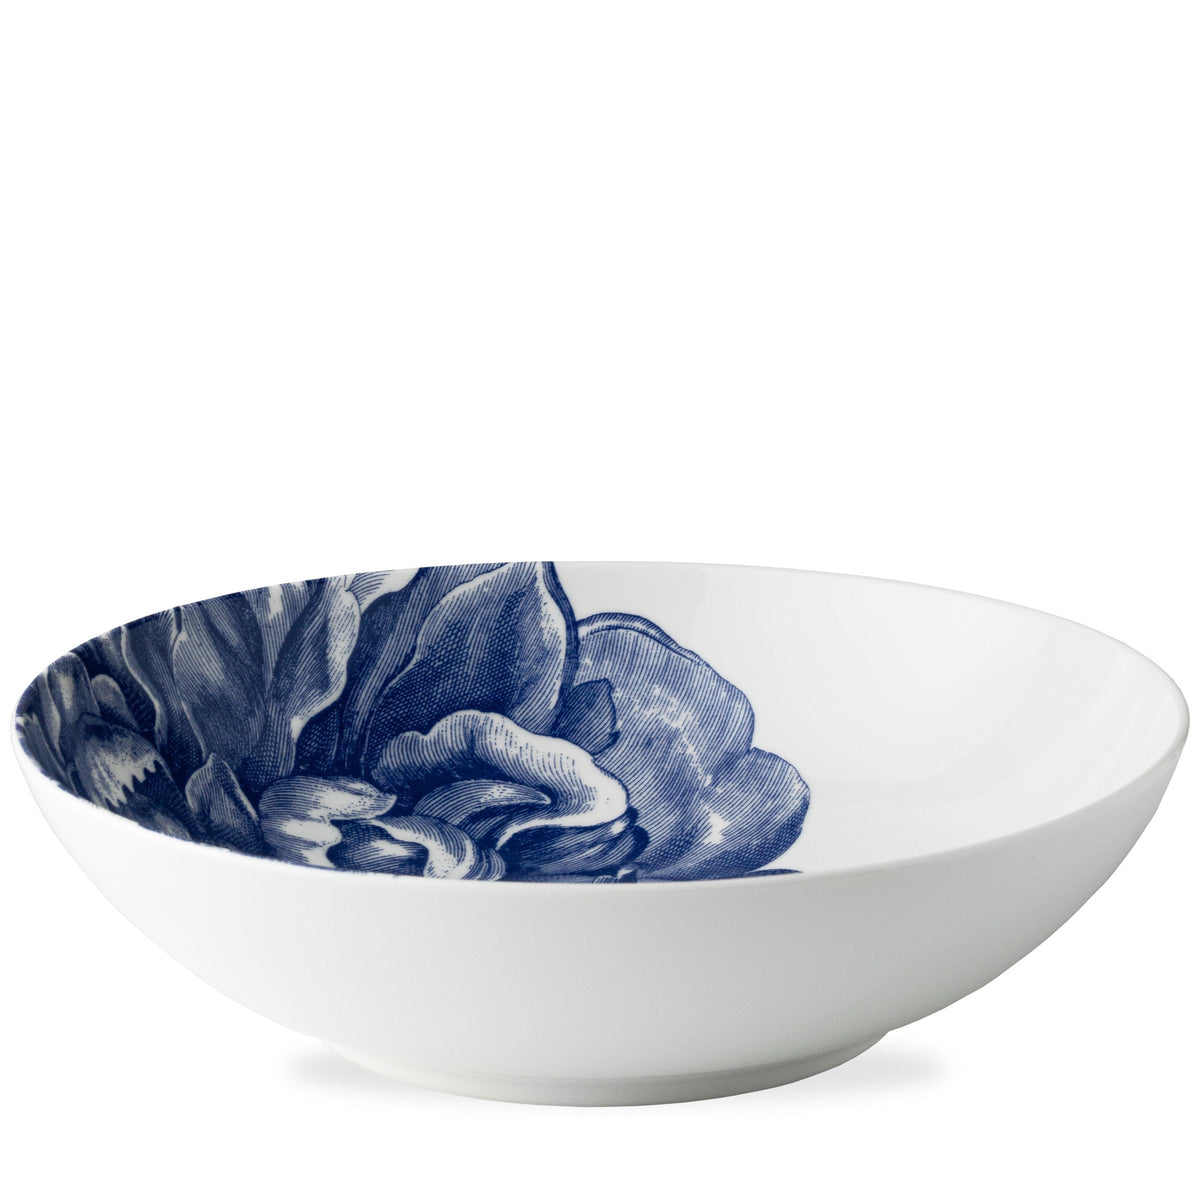 A Peony Wide Serving Bowl from Caskata Artisanal Home, with a blue floral pattern inside.